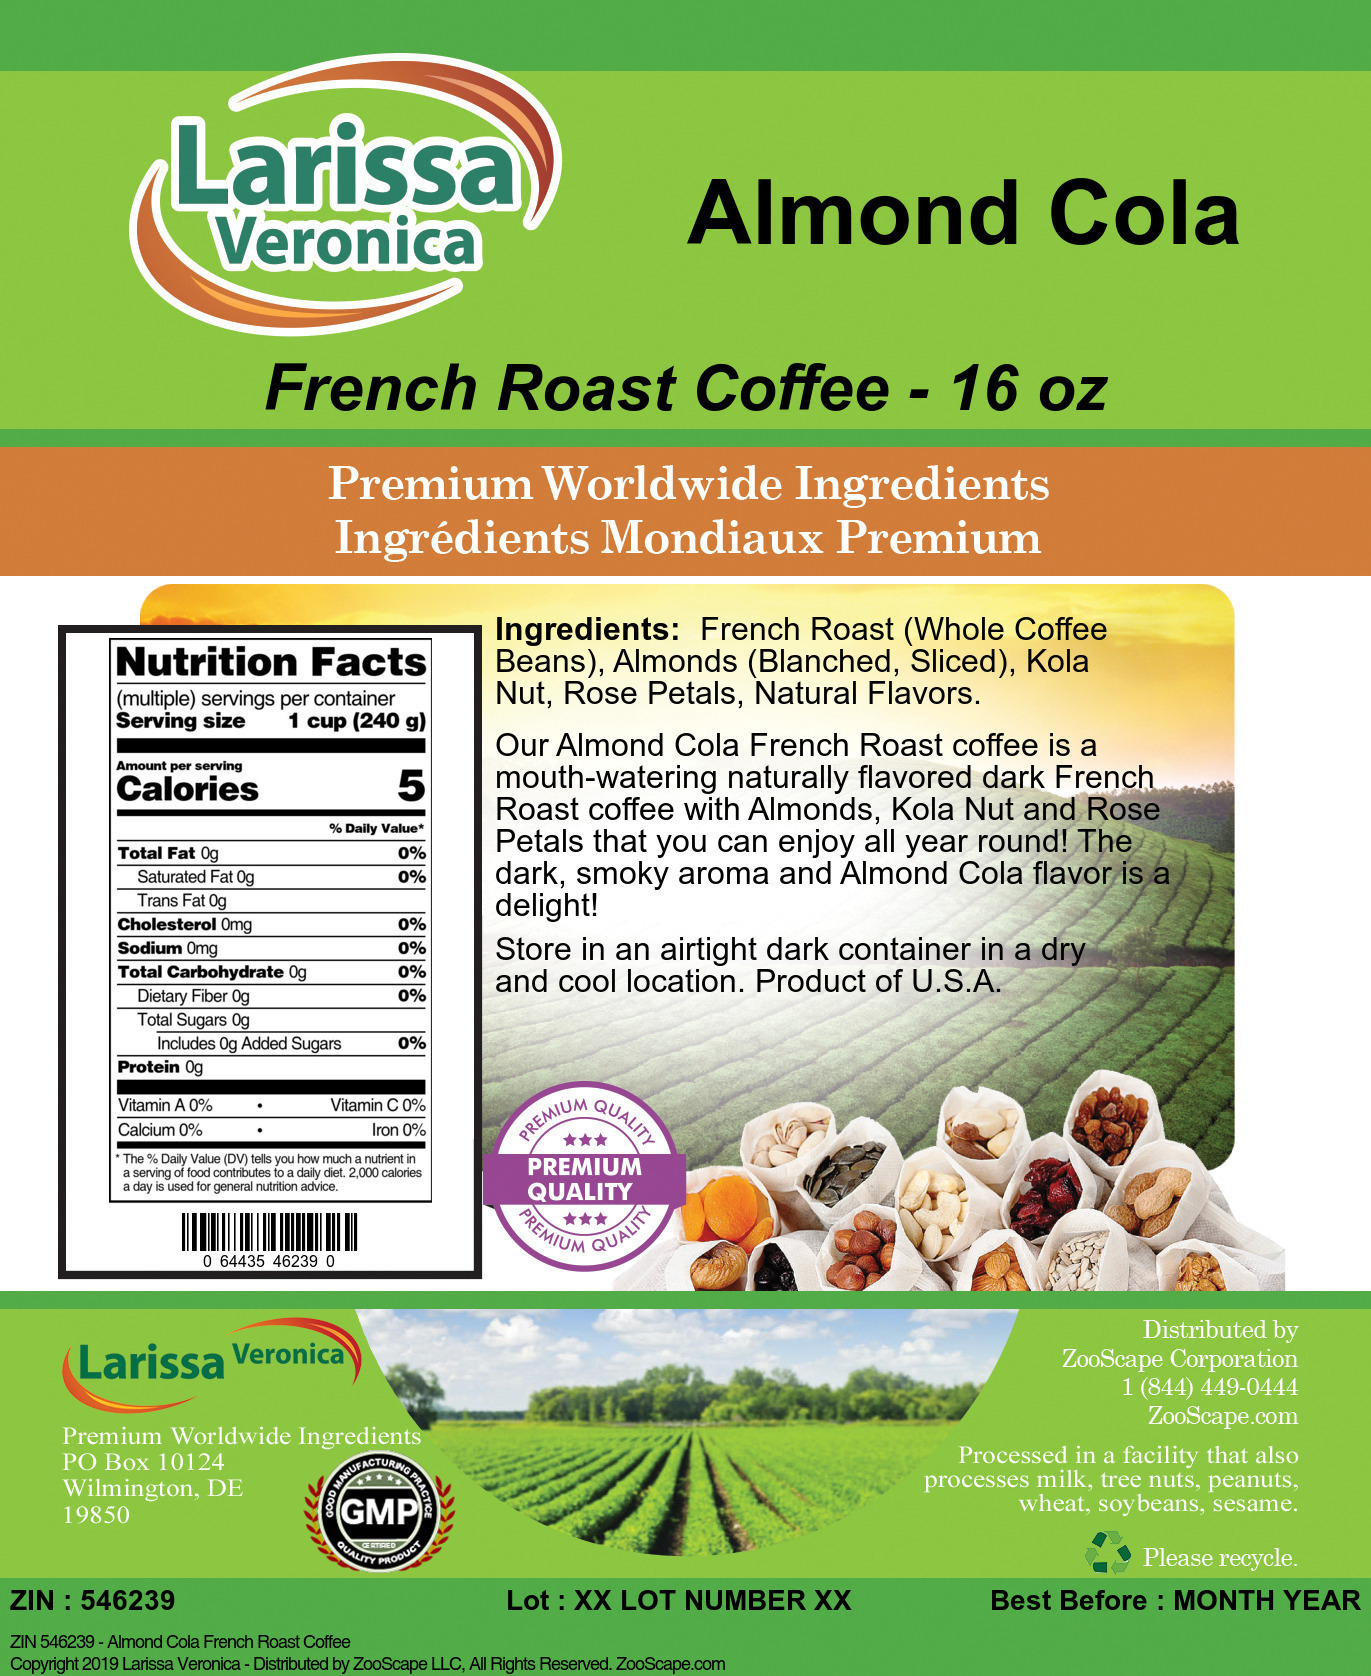 Almond Cola French Roast Coffee - Label